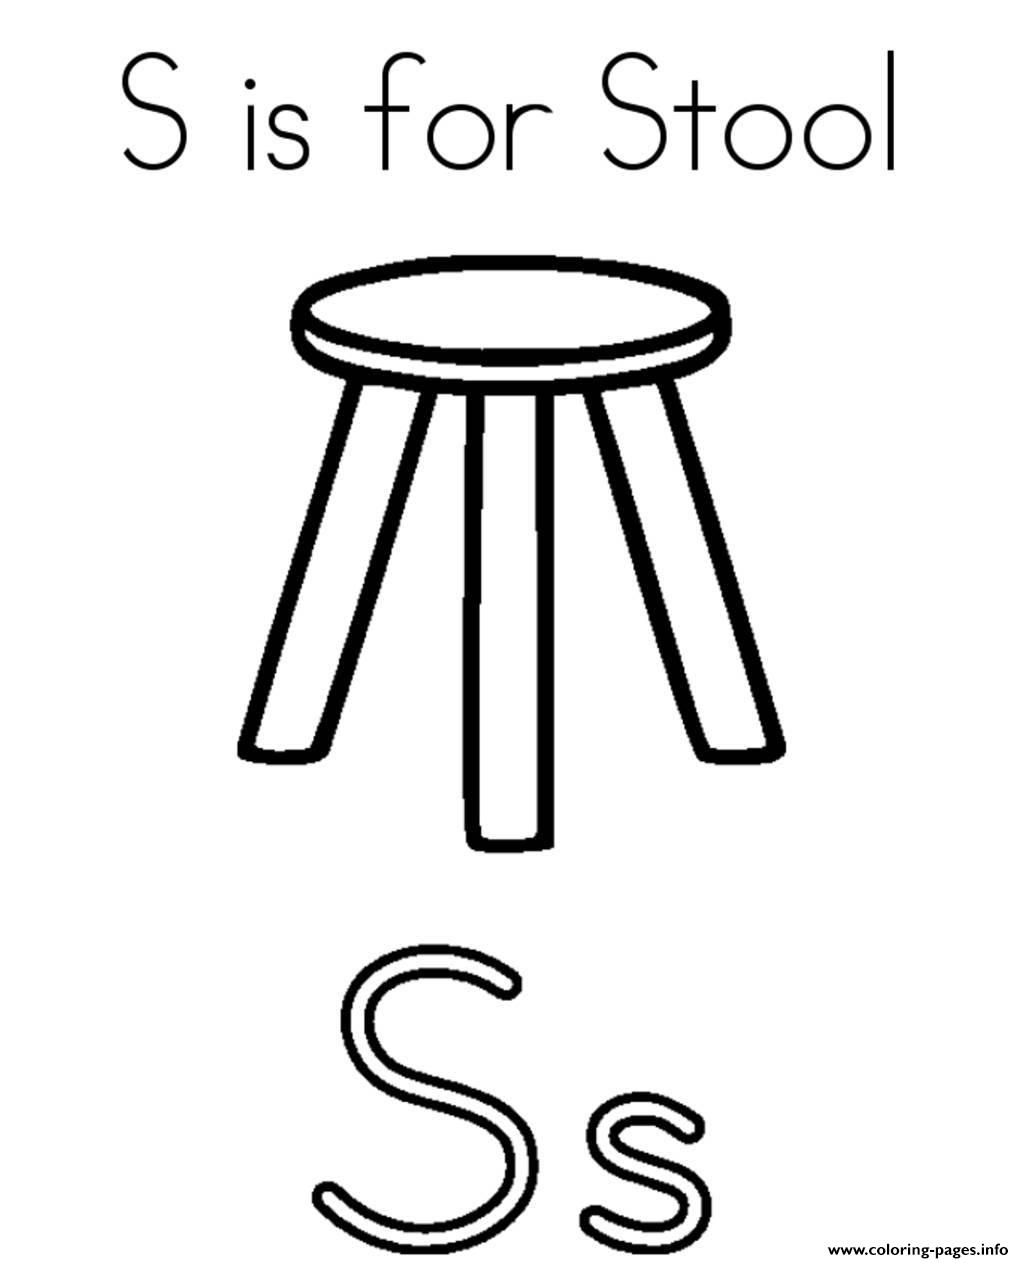 Stool Alphabet 1c8a coloring pages